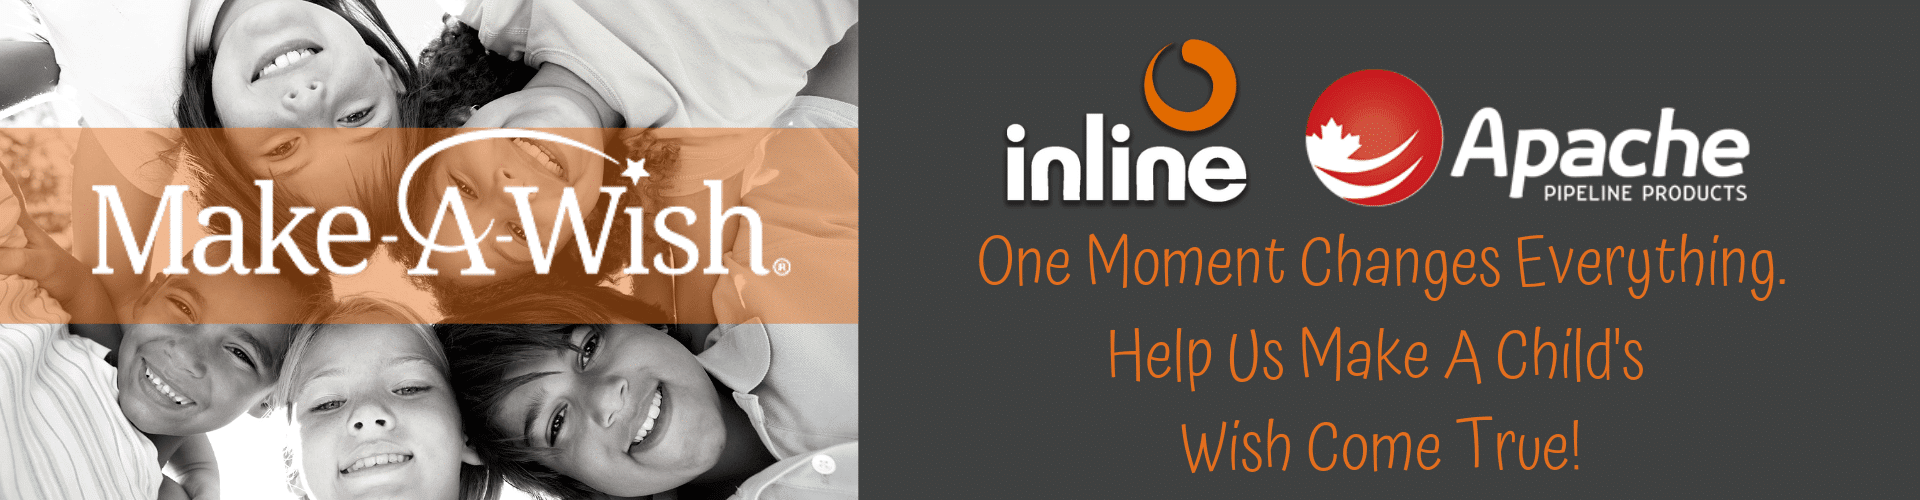 Inline Donates Proceeds to Apache's Make A Wish Foundation Campaign